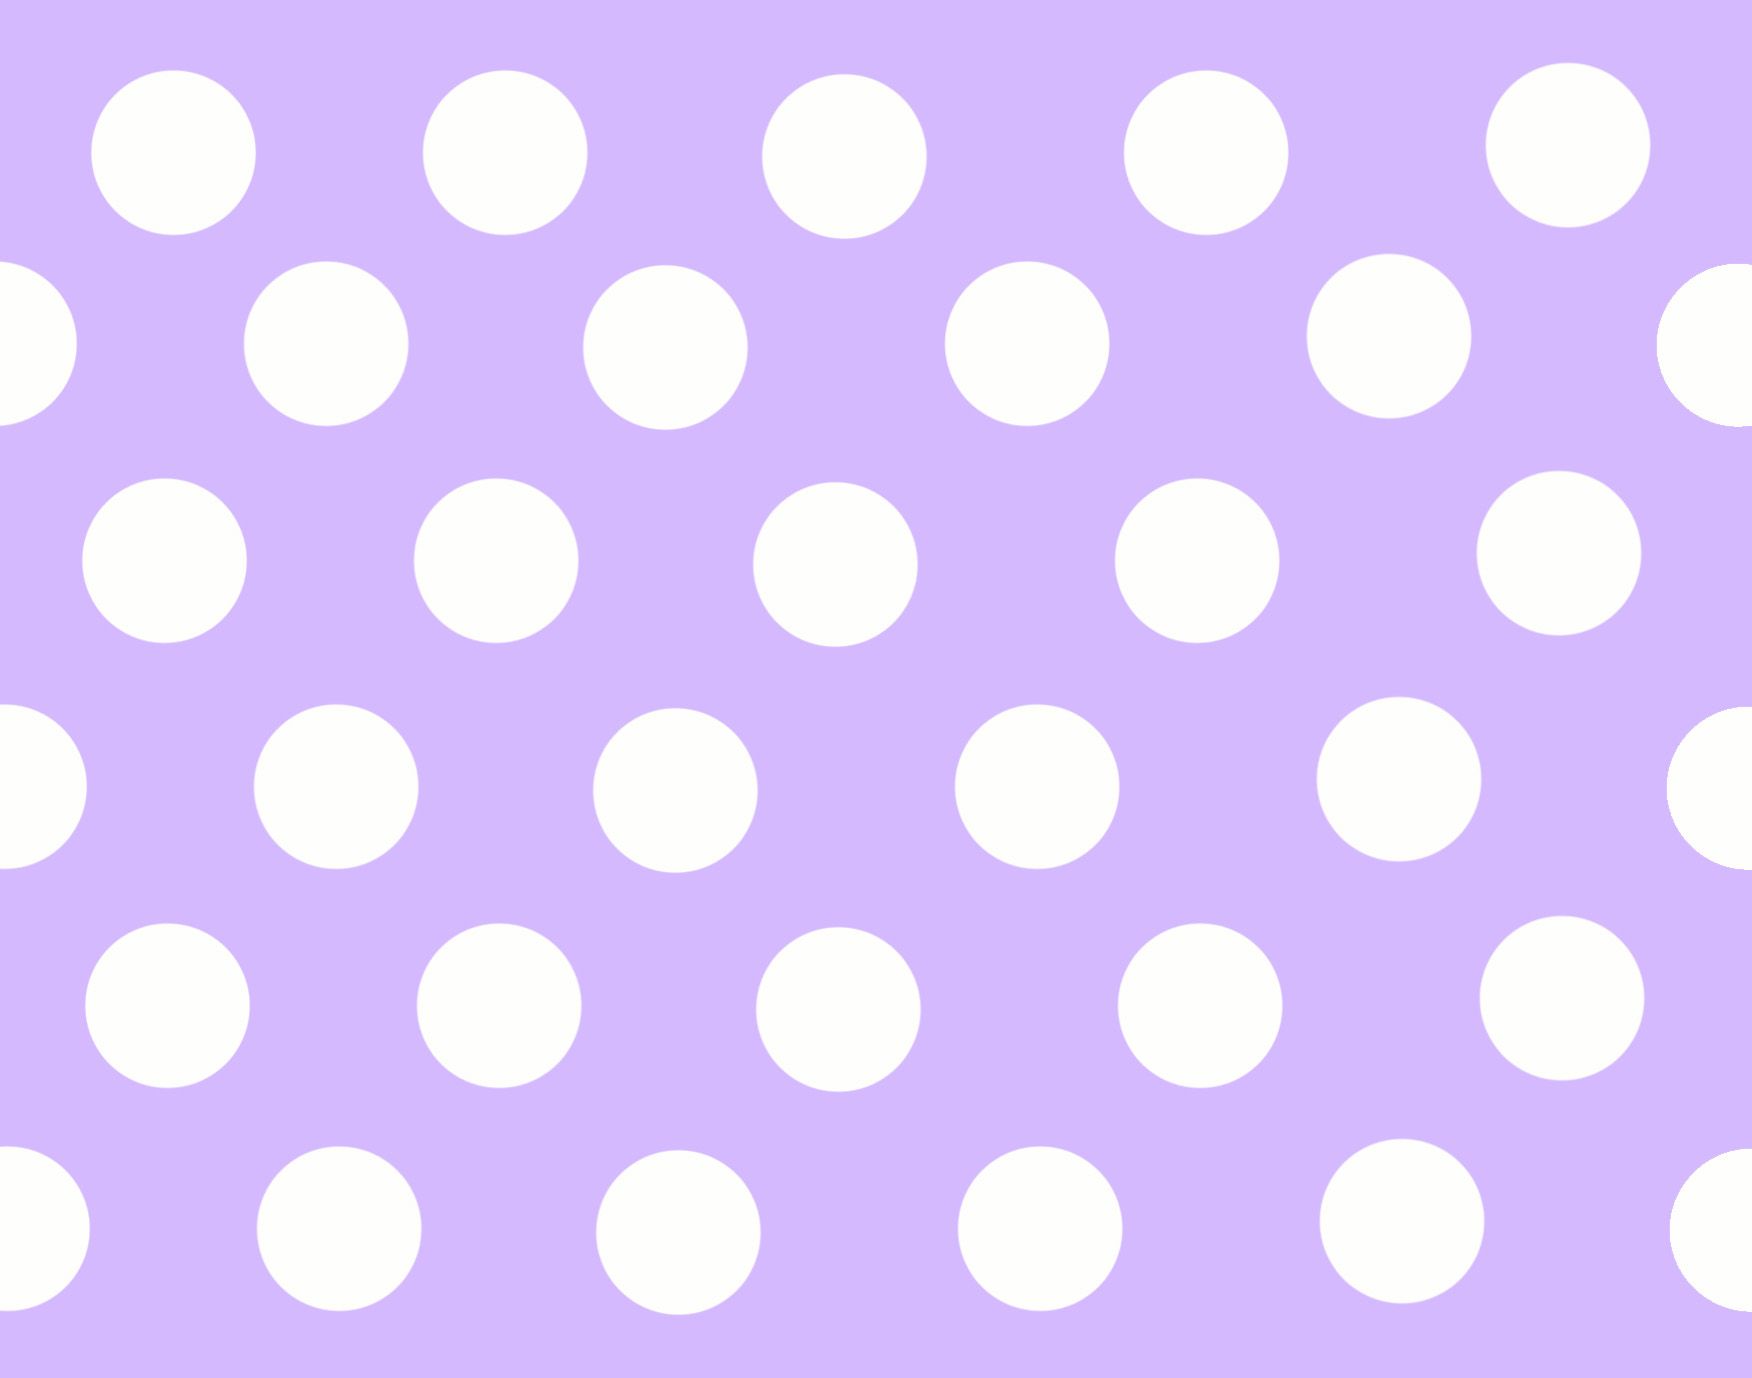 4. Cute light purple nail design with polka dots - wide 3